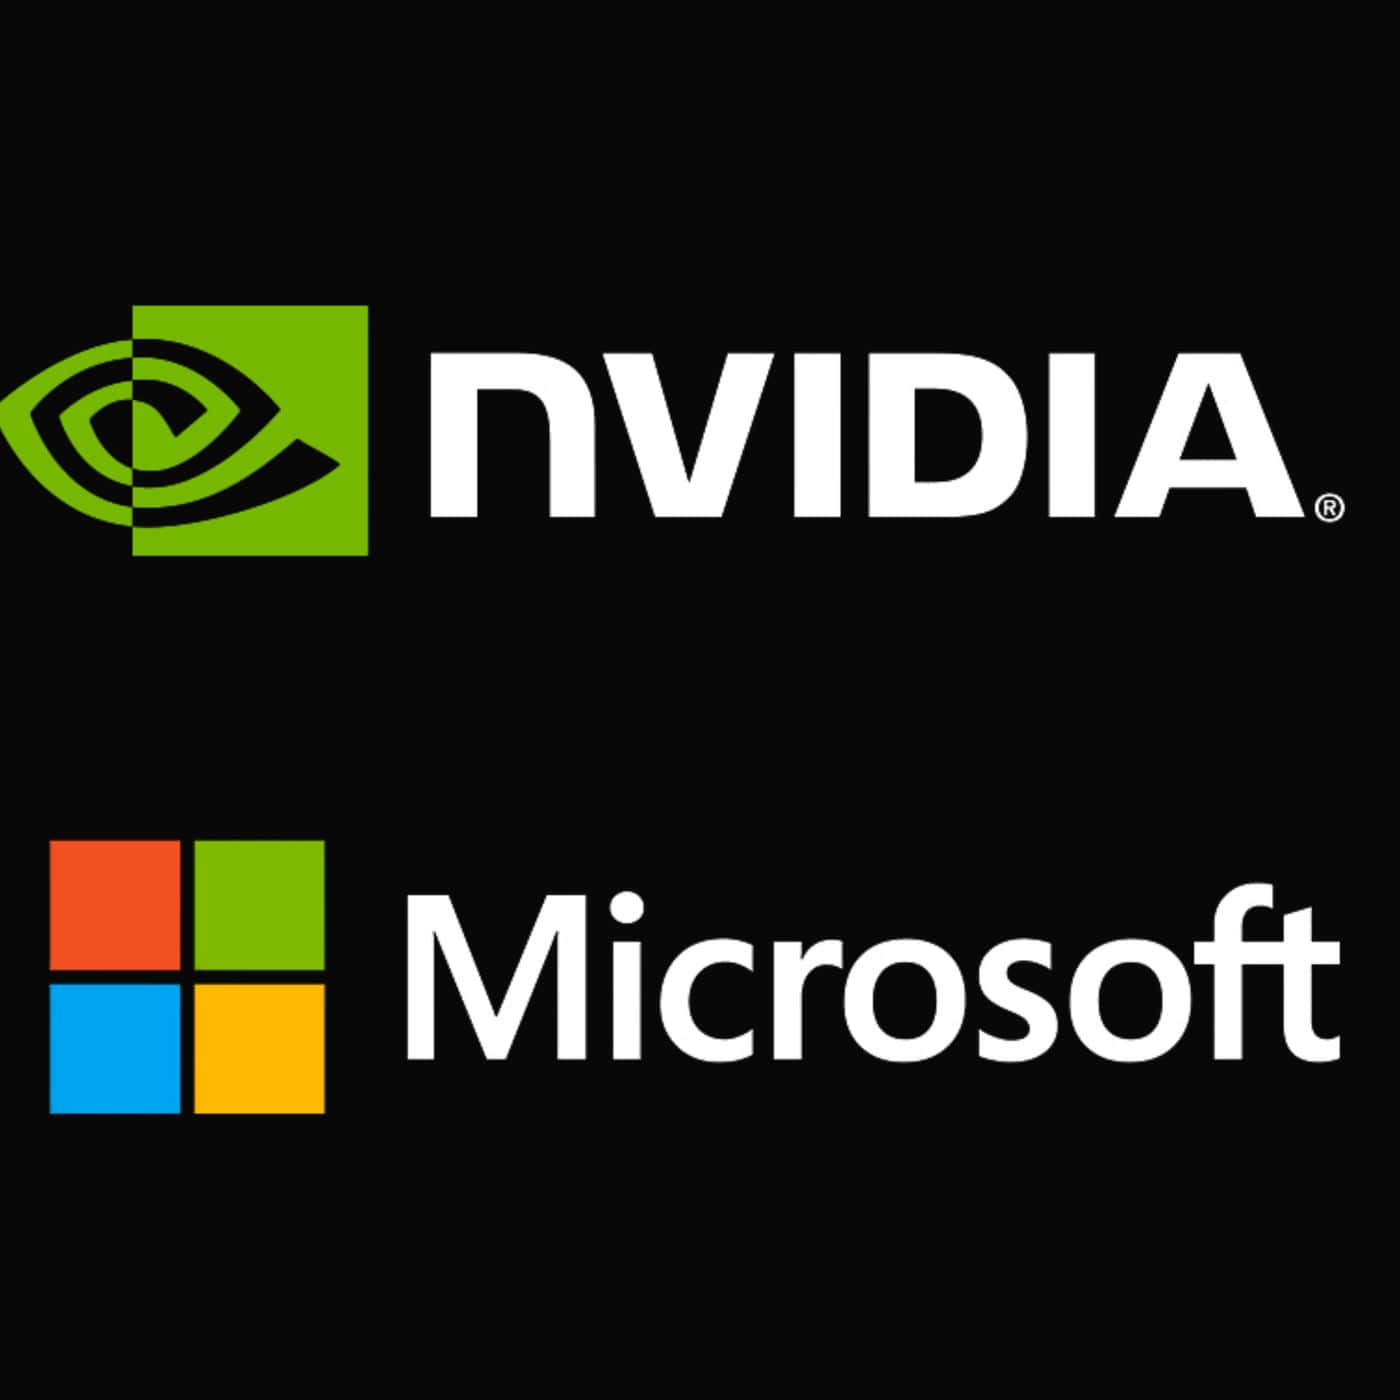 nvidia and microsoft logos on a black background